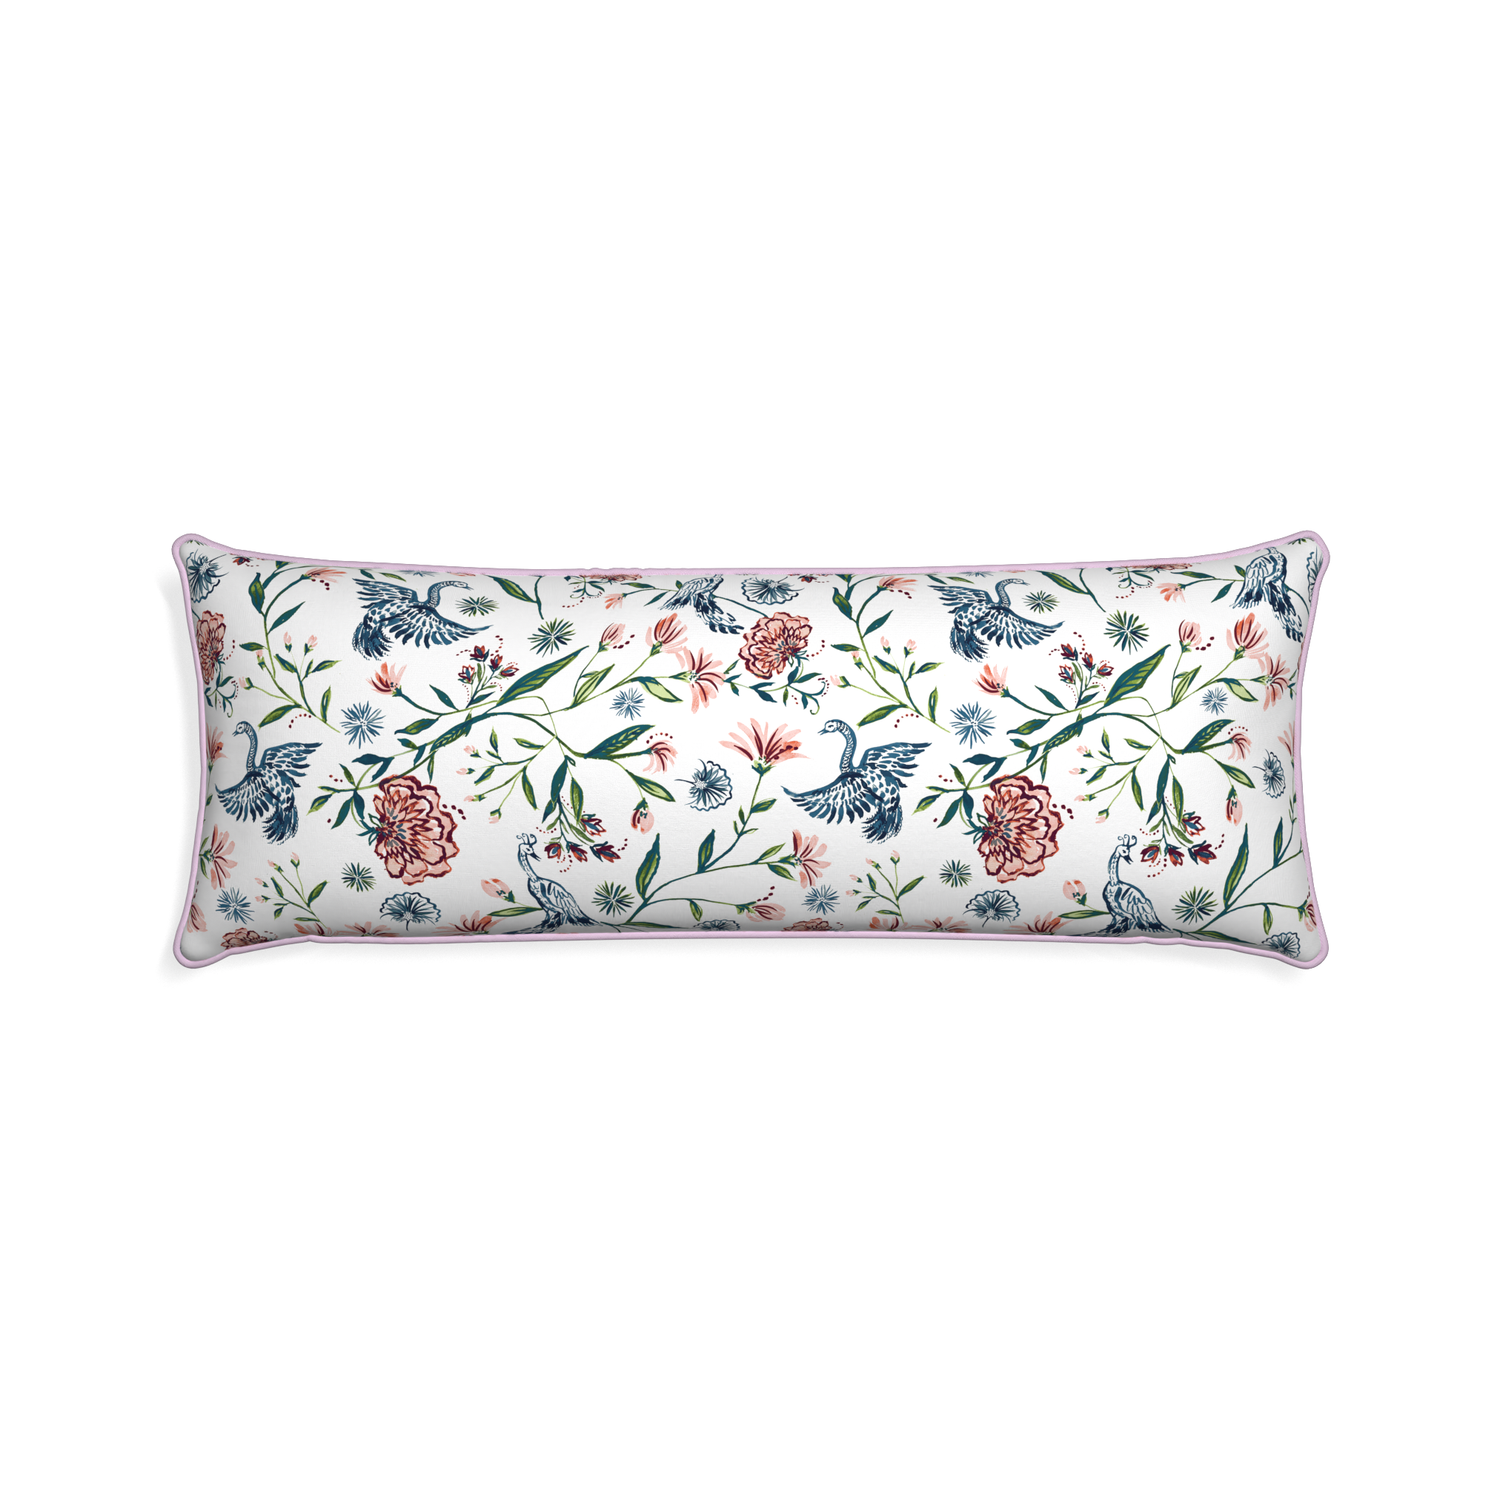 Xl-lumbar daphne cream custom pillow with l piping on white background